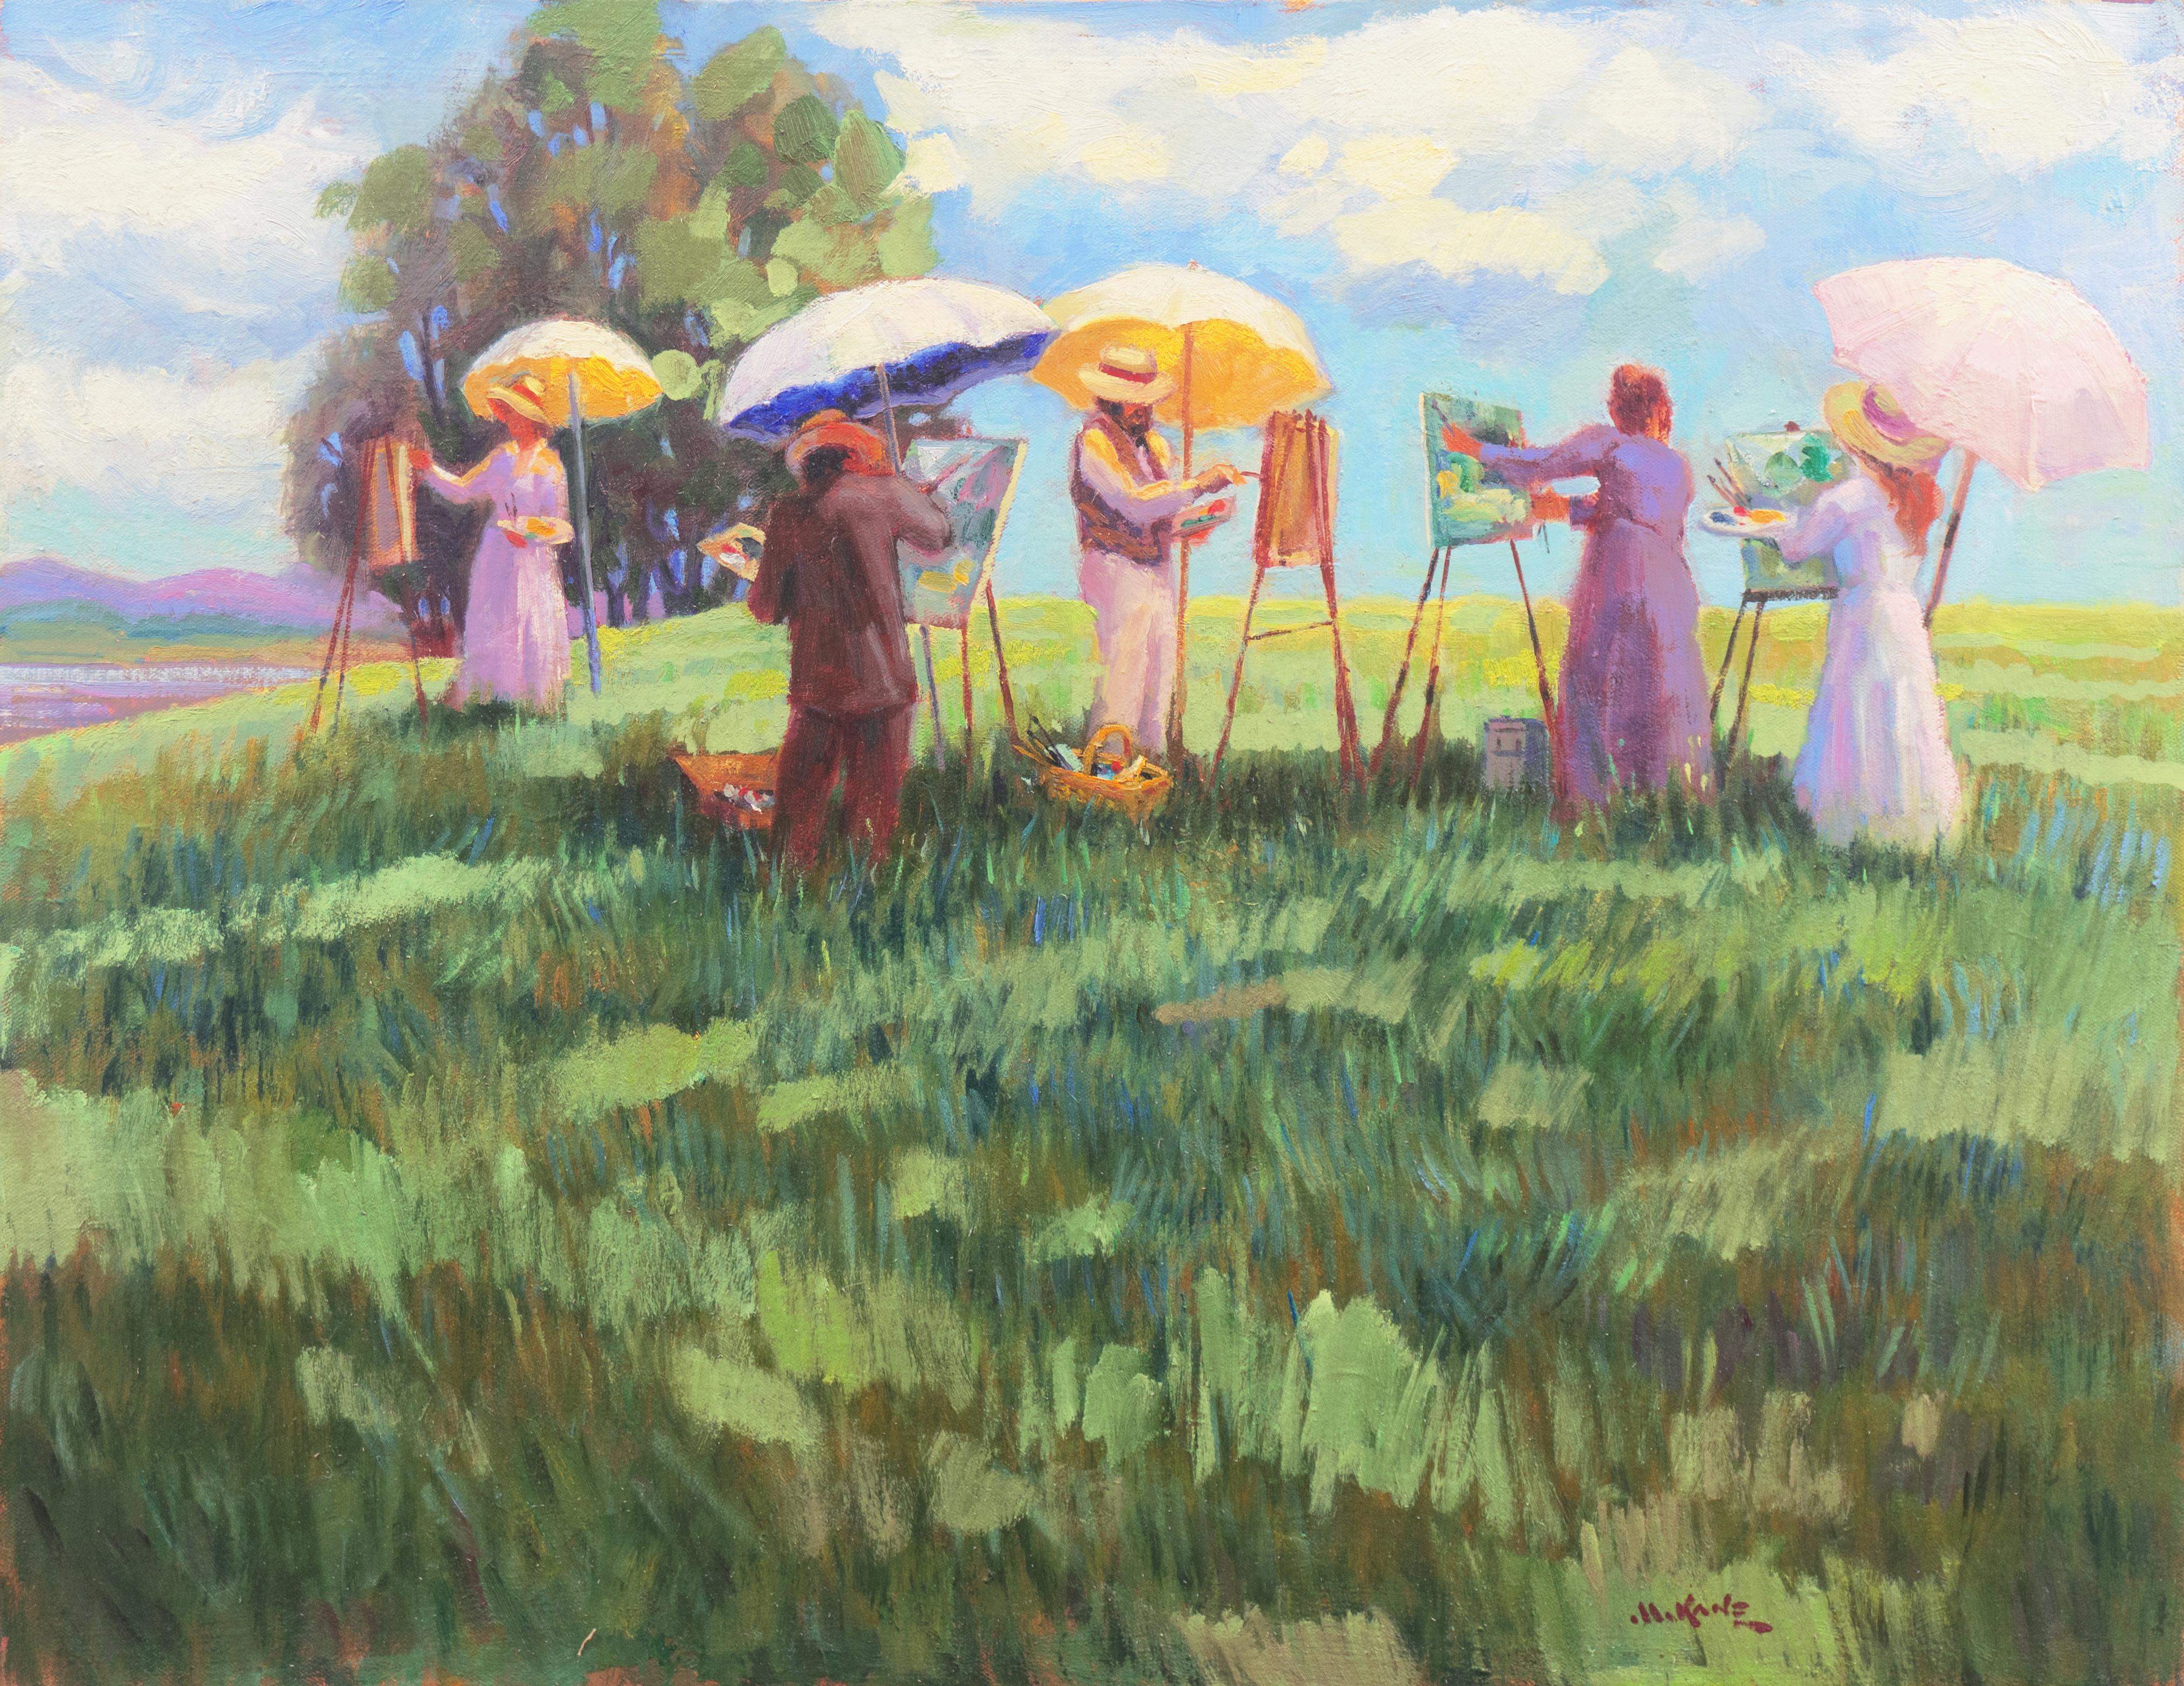 Mel Kane Figurative Painting - 'Edwardian Plein-Air Painters', Summer Landscape with Artists Working